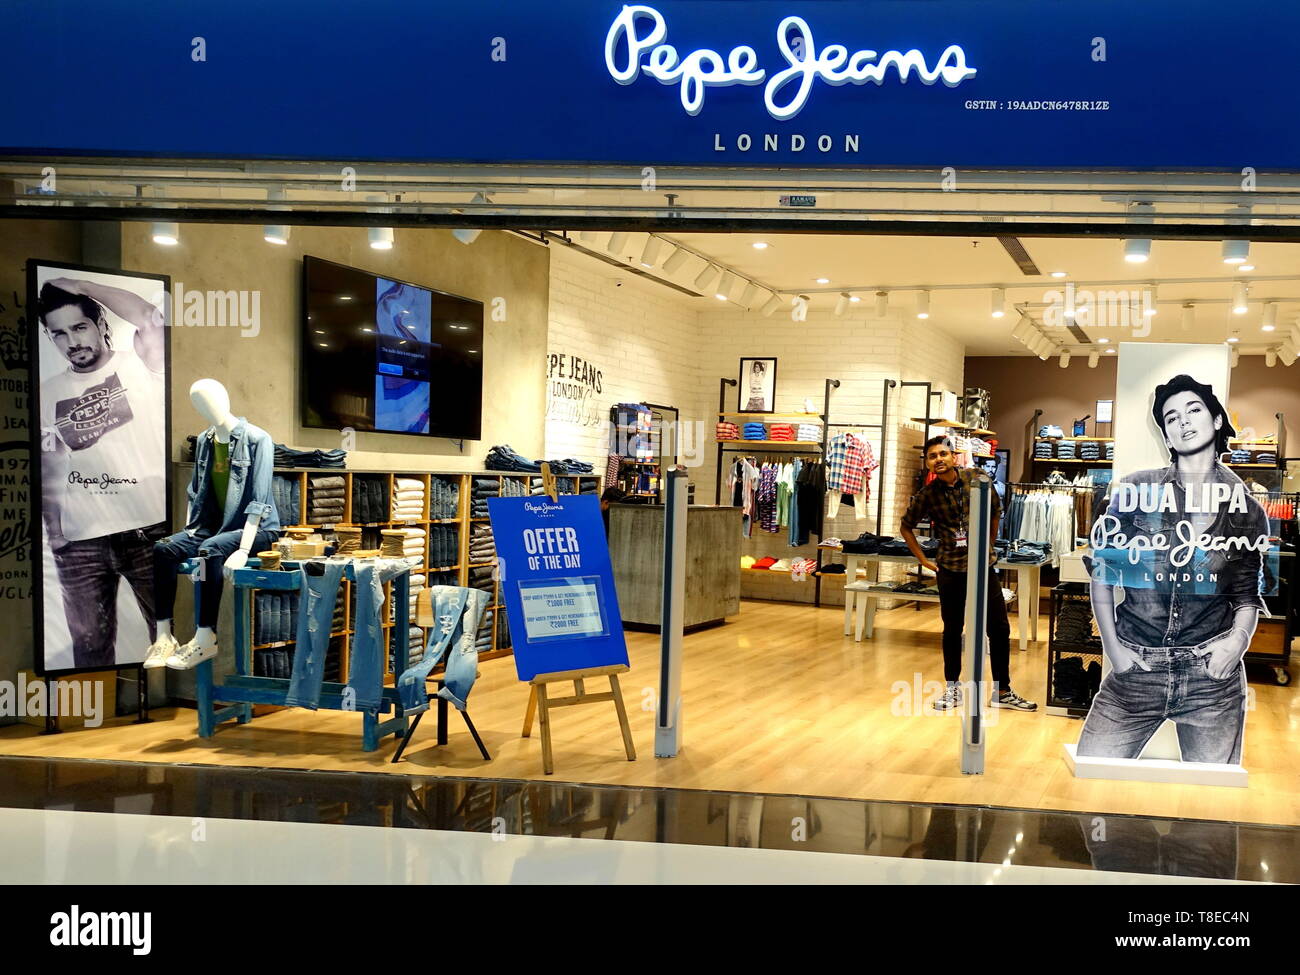 Pepe Jeans plans to open 50 stores in India this year, Retail News, pepe  jeans